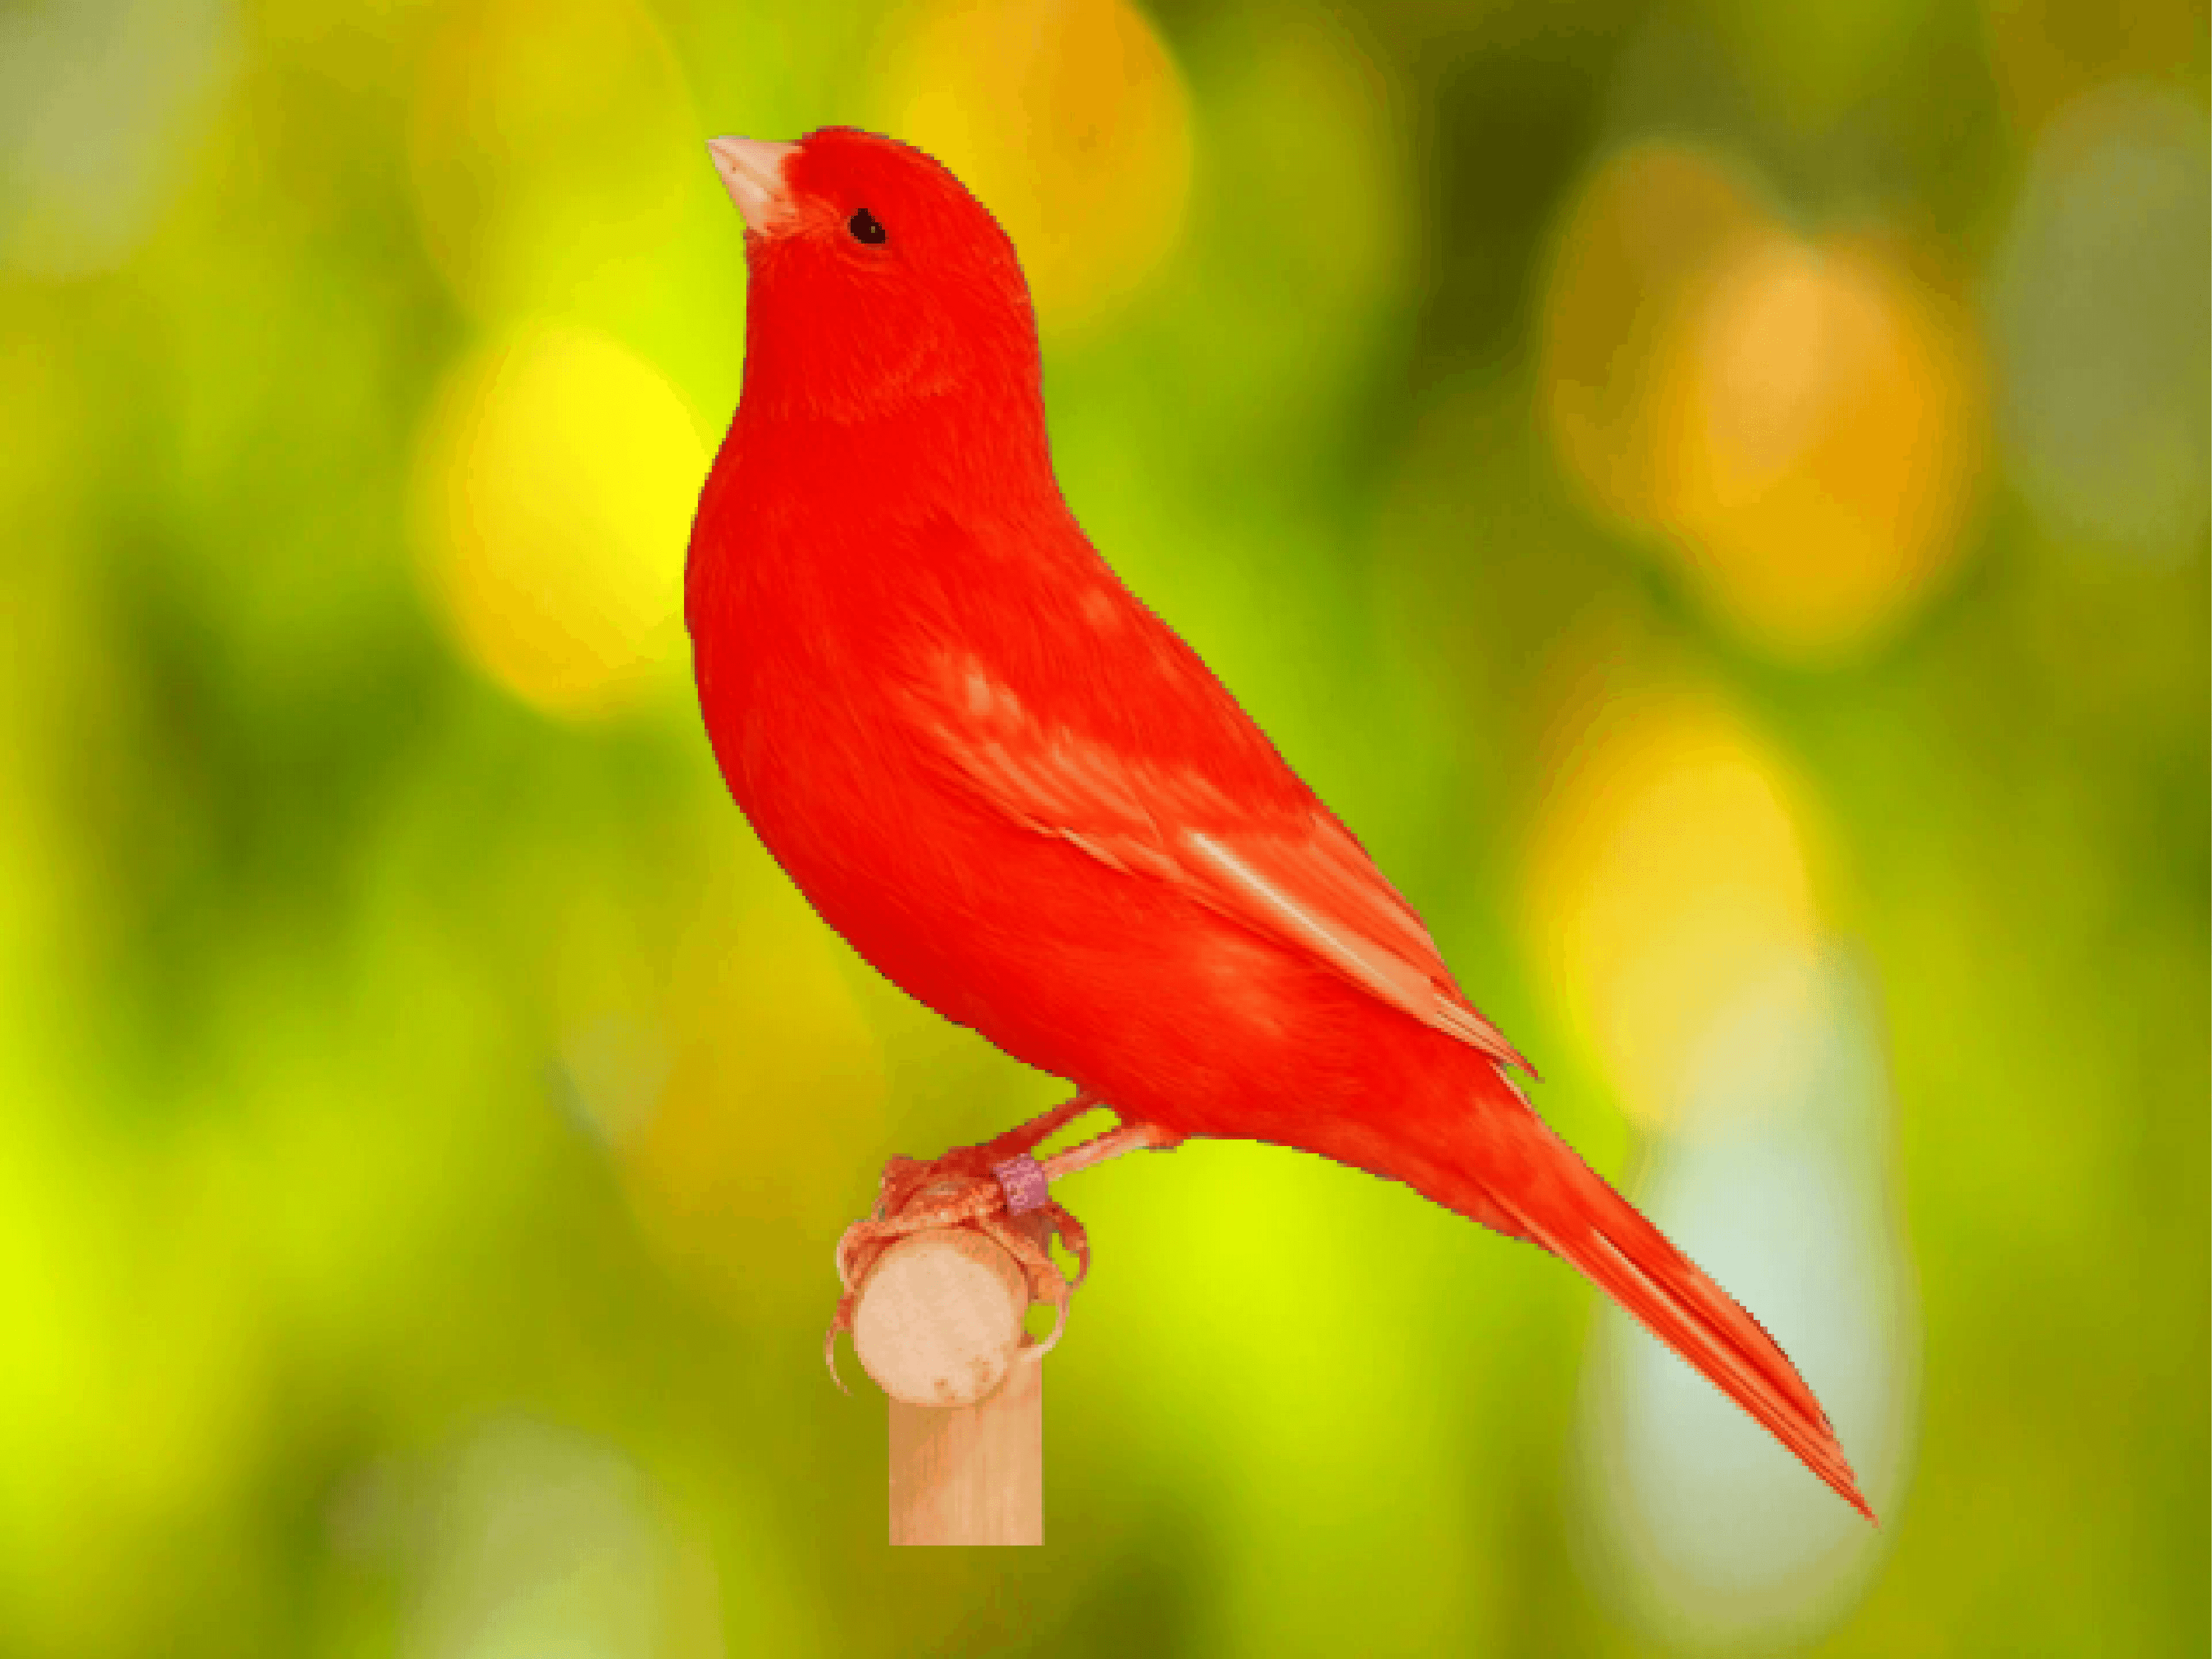 Do Red Canaries Need Special Food? Why? 2 Facts